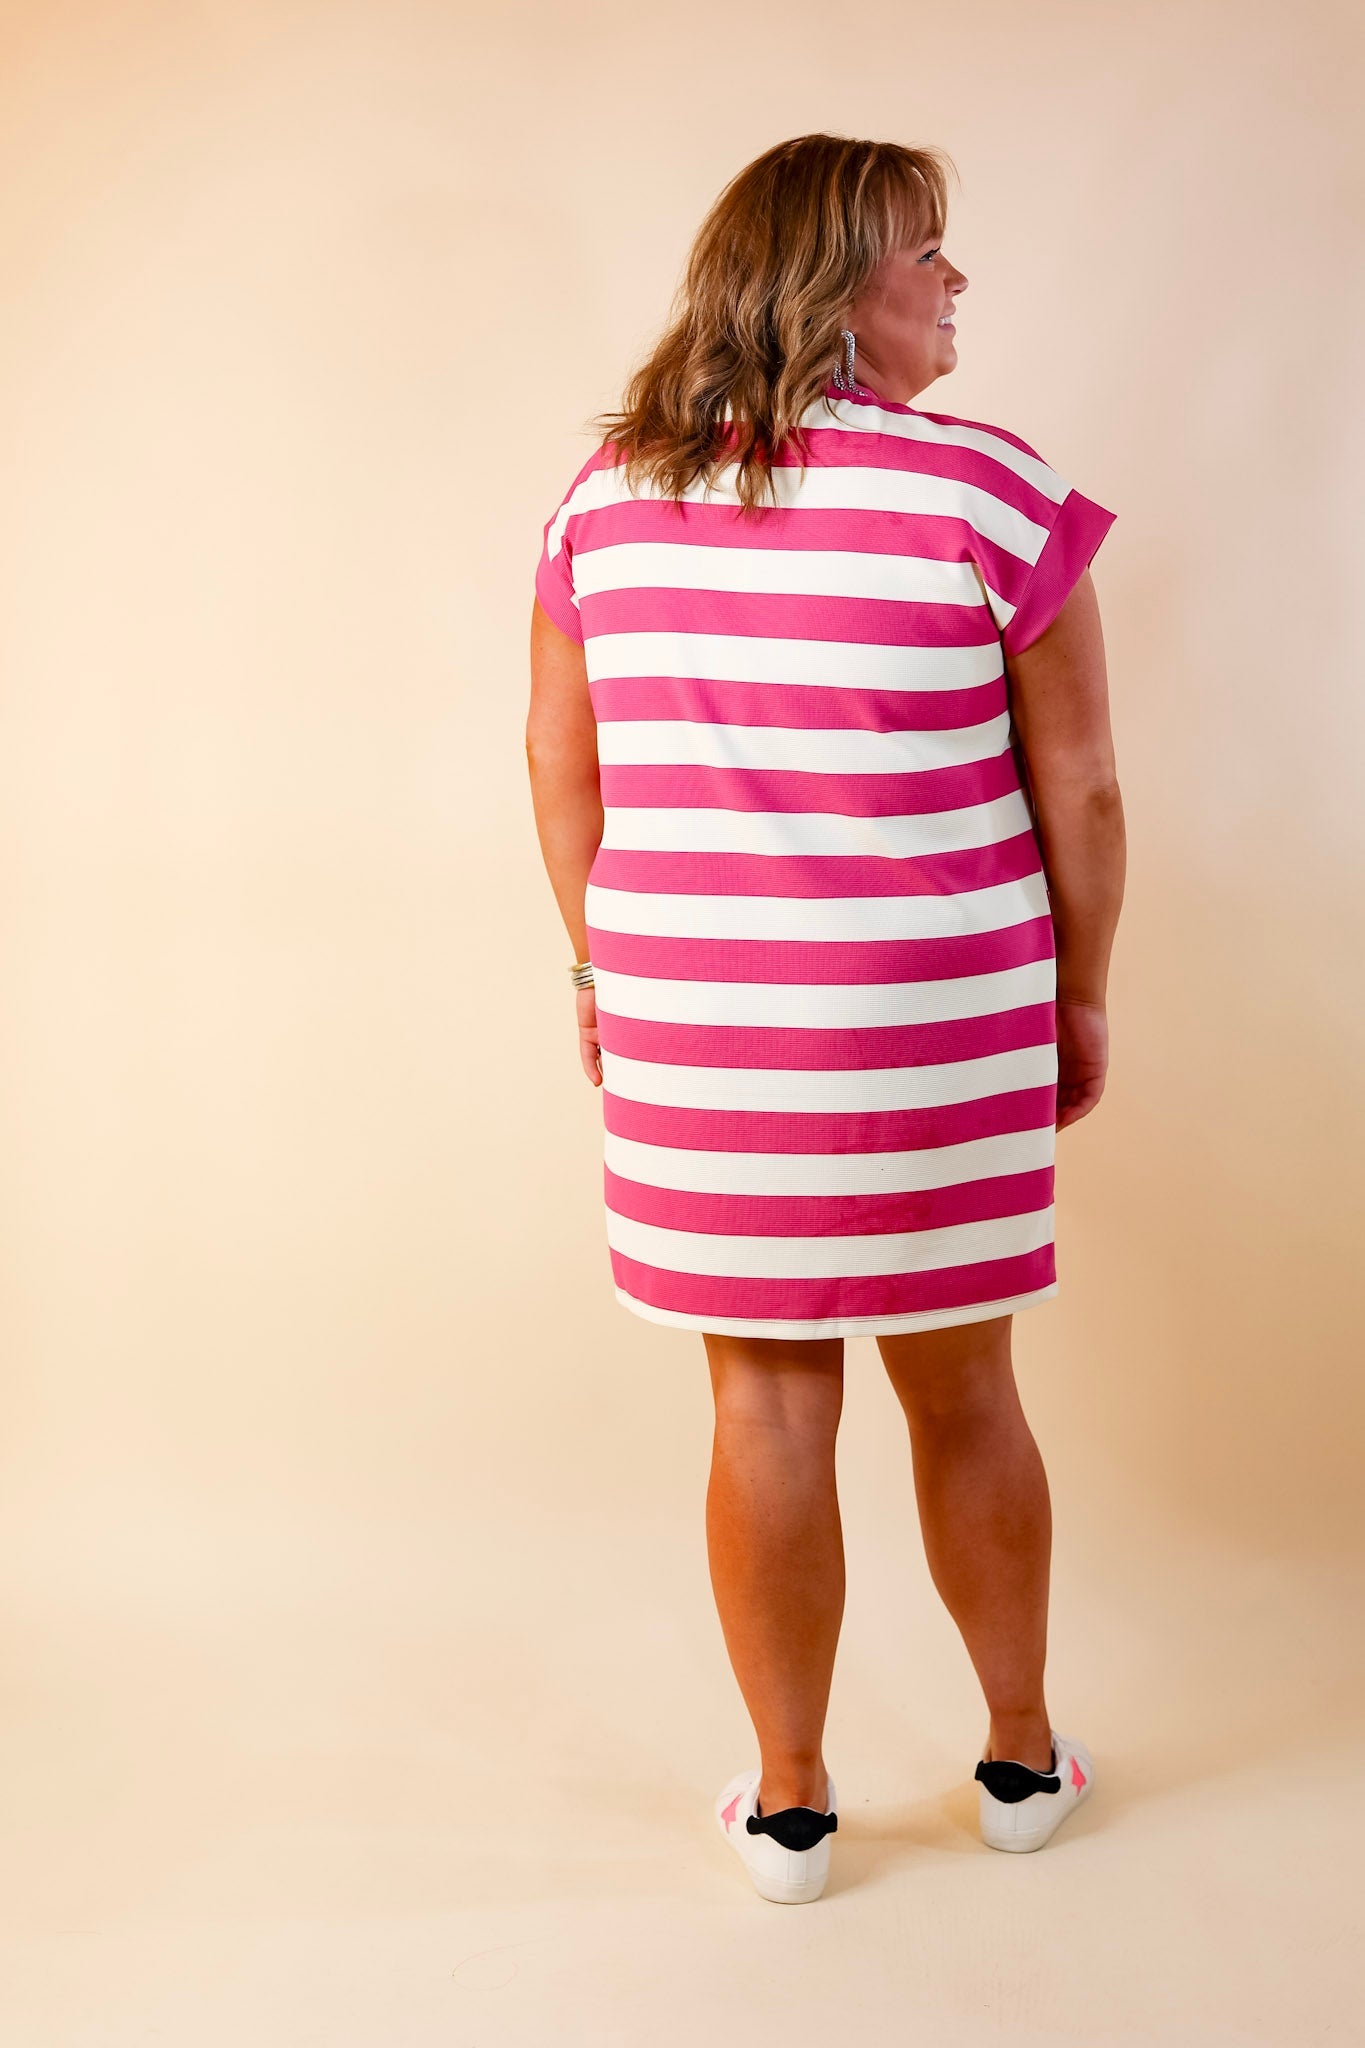 Stripe it Simple Striped Dress with Cap Sleeves in Pink and Cream - Giddy Up Glamour Boutique